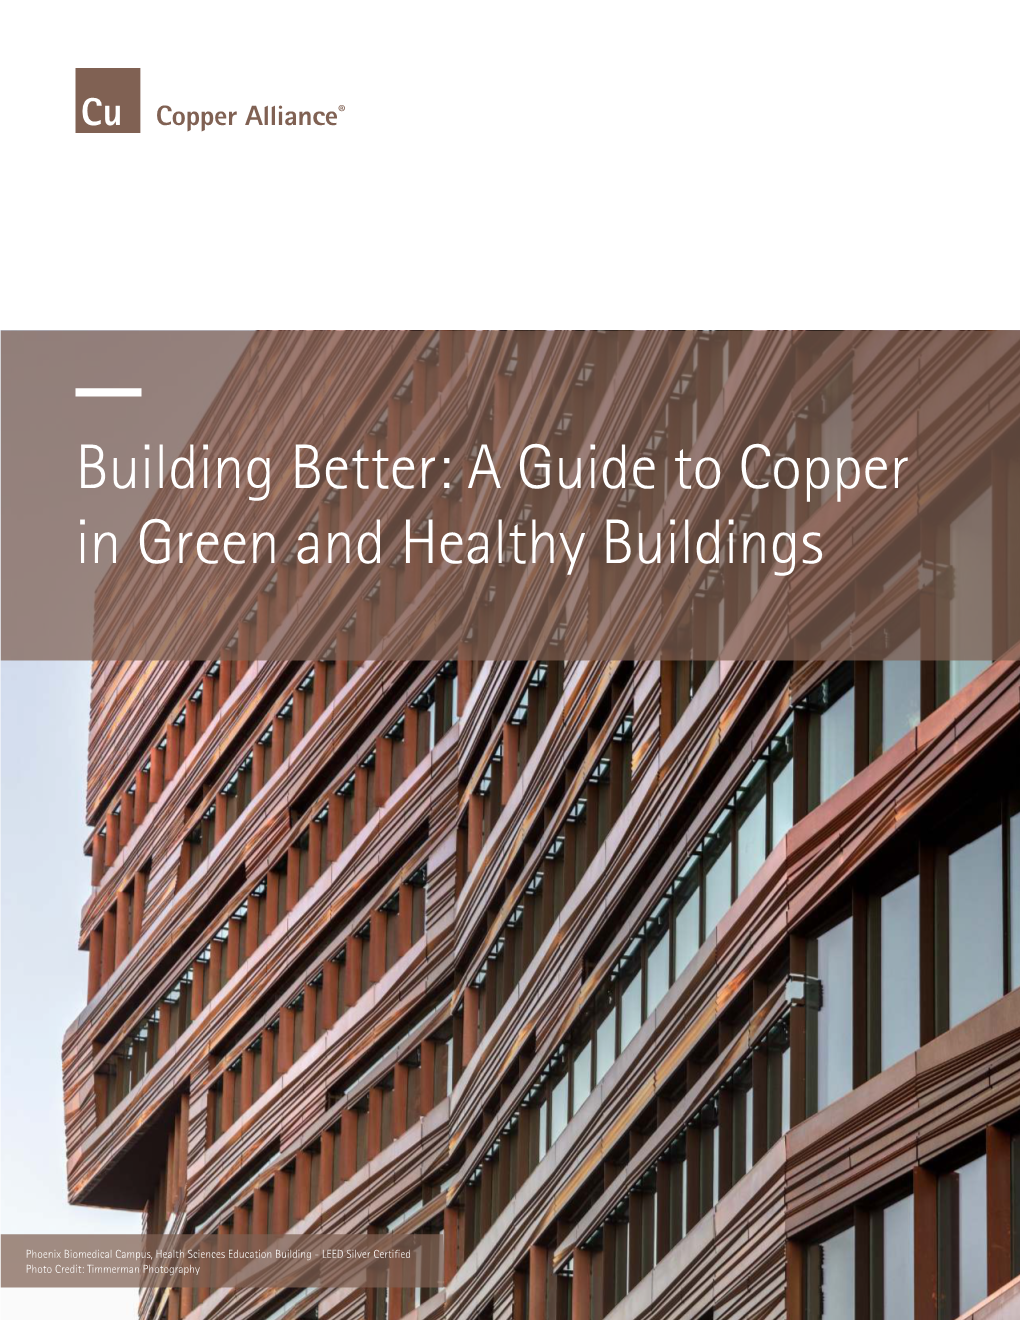 Building Better: a Guide to Copper in Green and Healthy Buildings